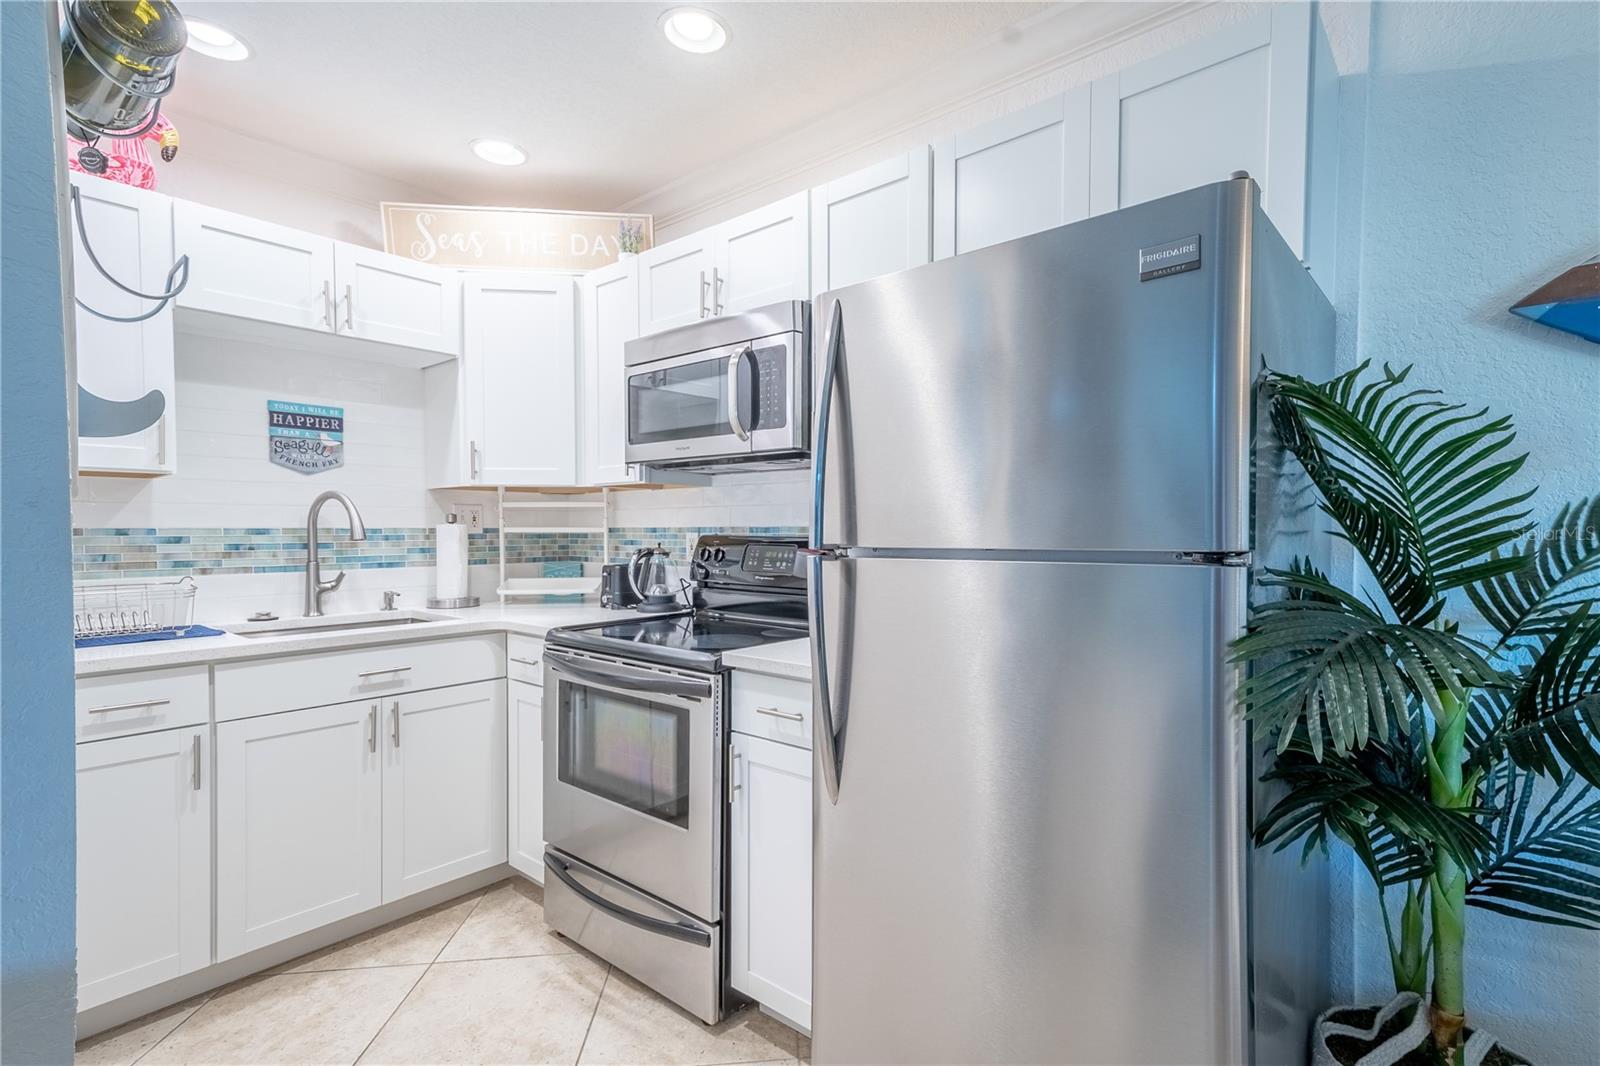 The kitchen features stainless steel appliances, sink  and cabinet pulls for a cohesive look.